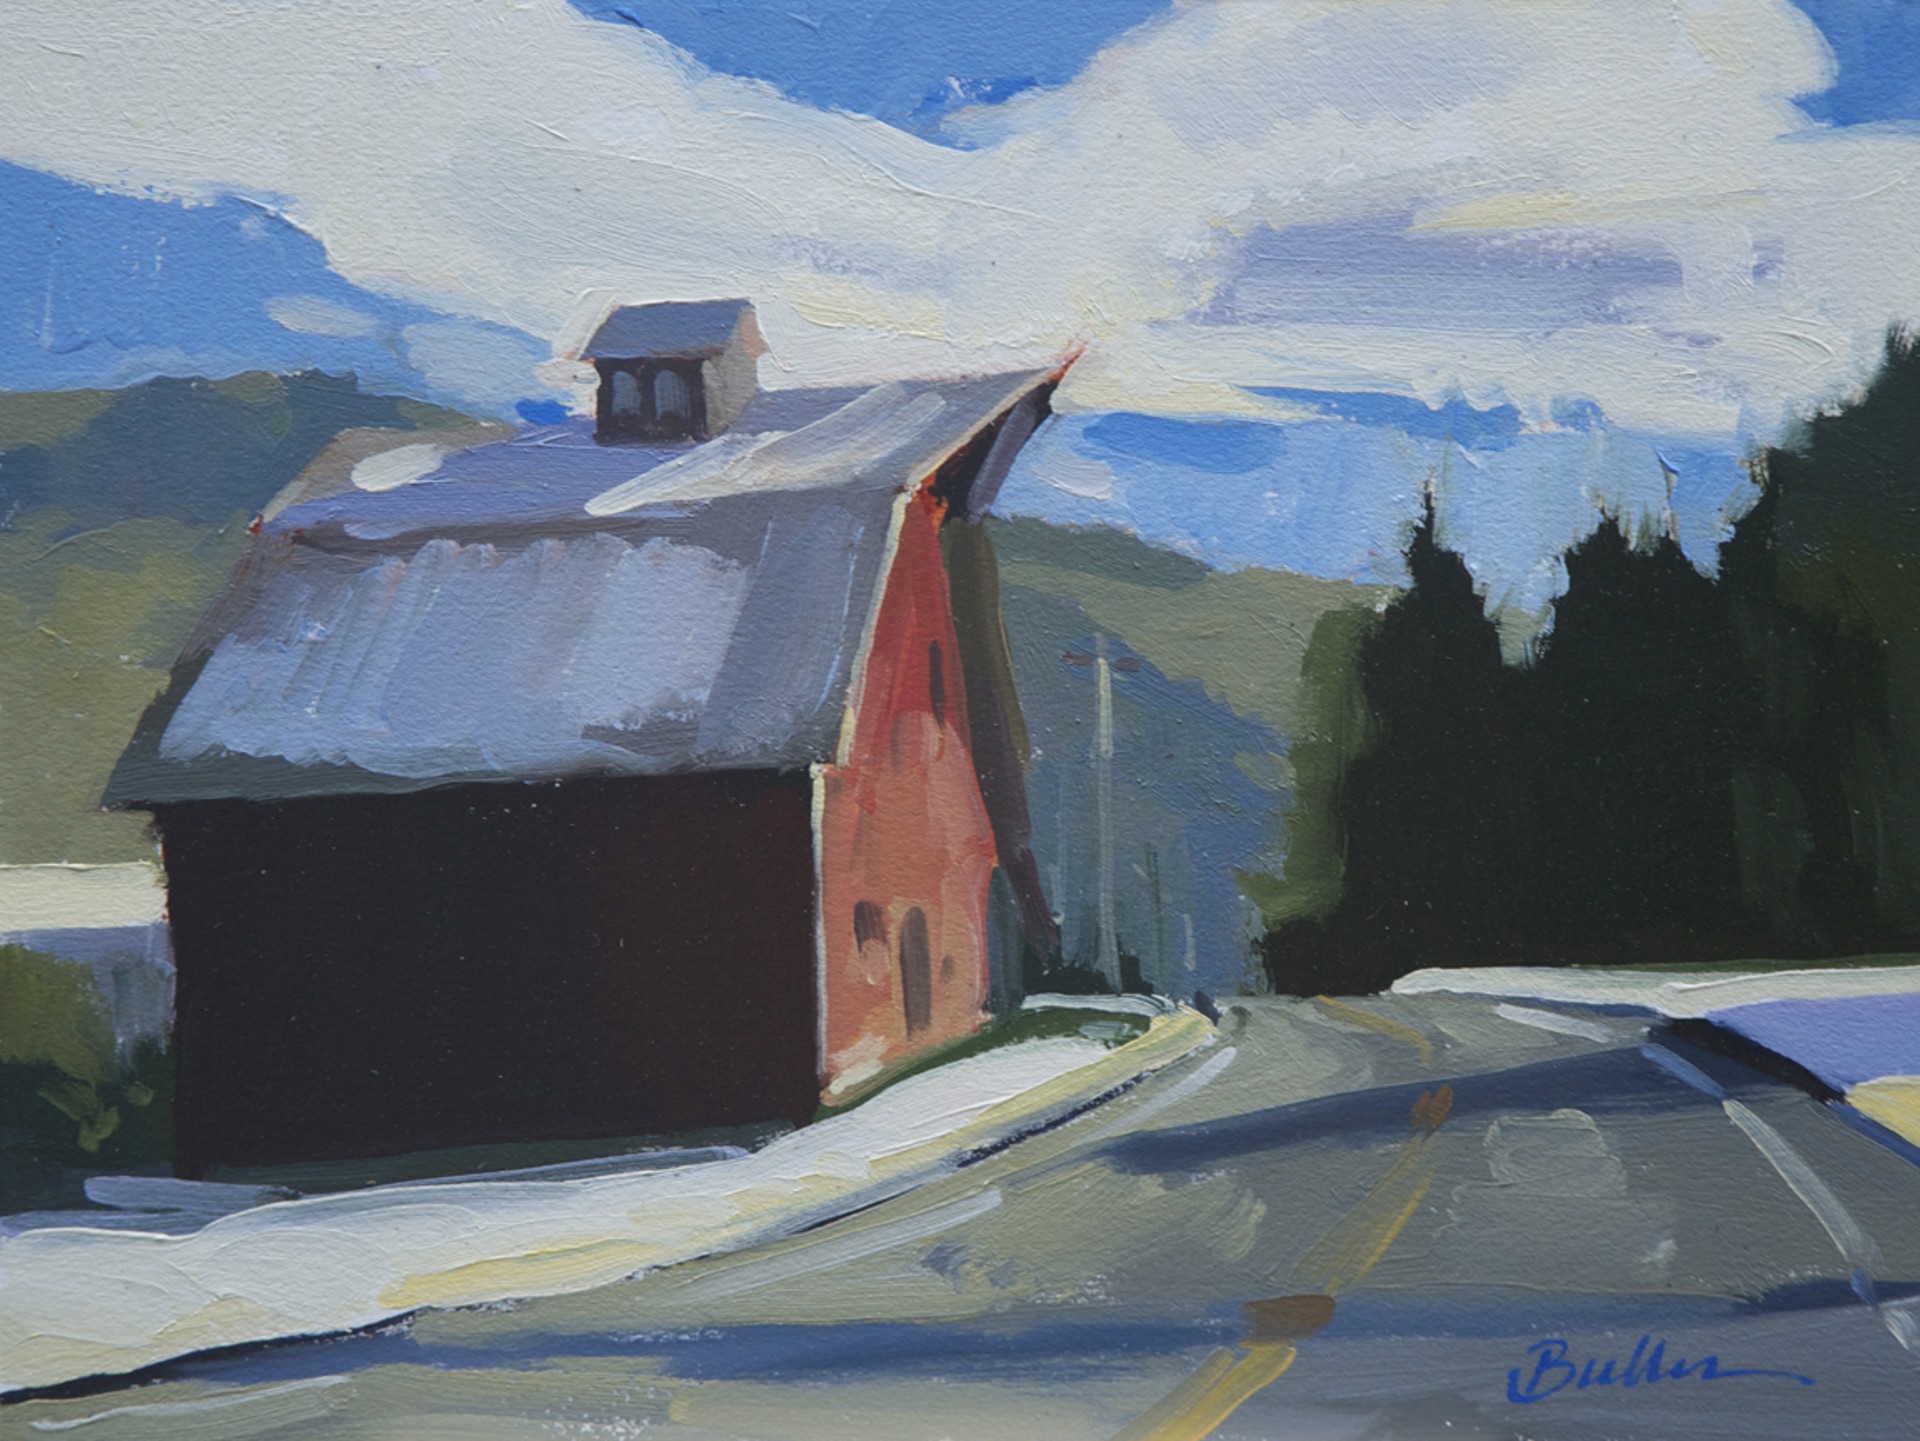 Snowy Road To The Barn by Samantha Buller